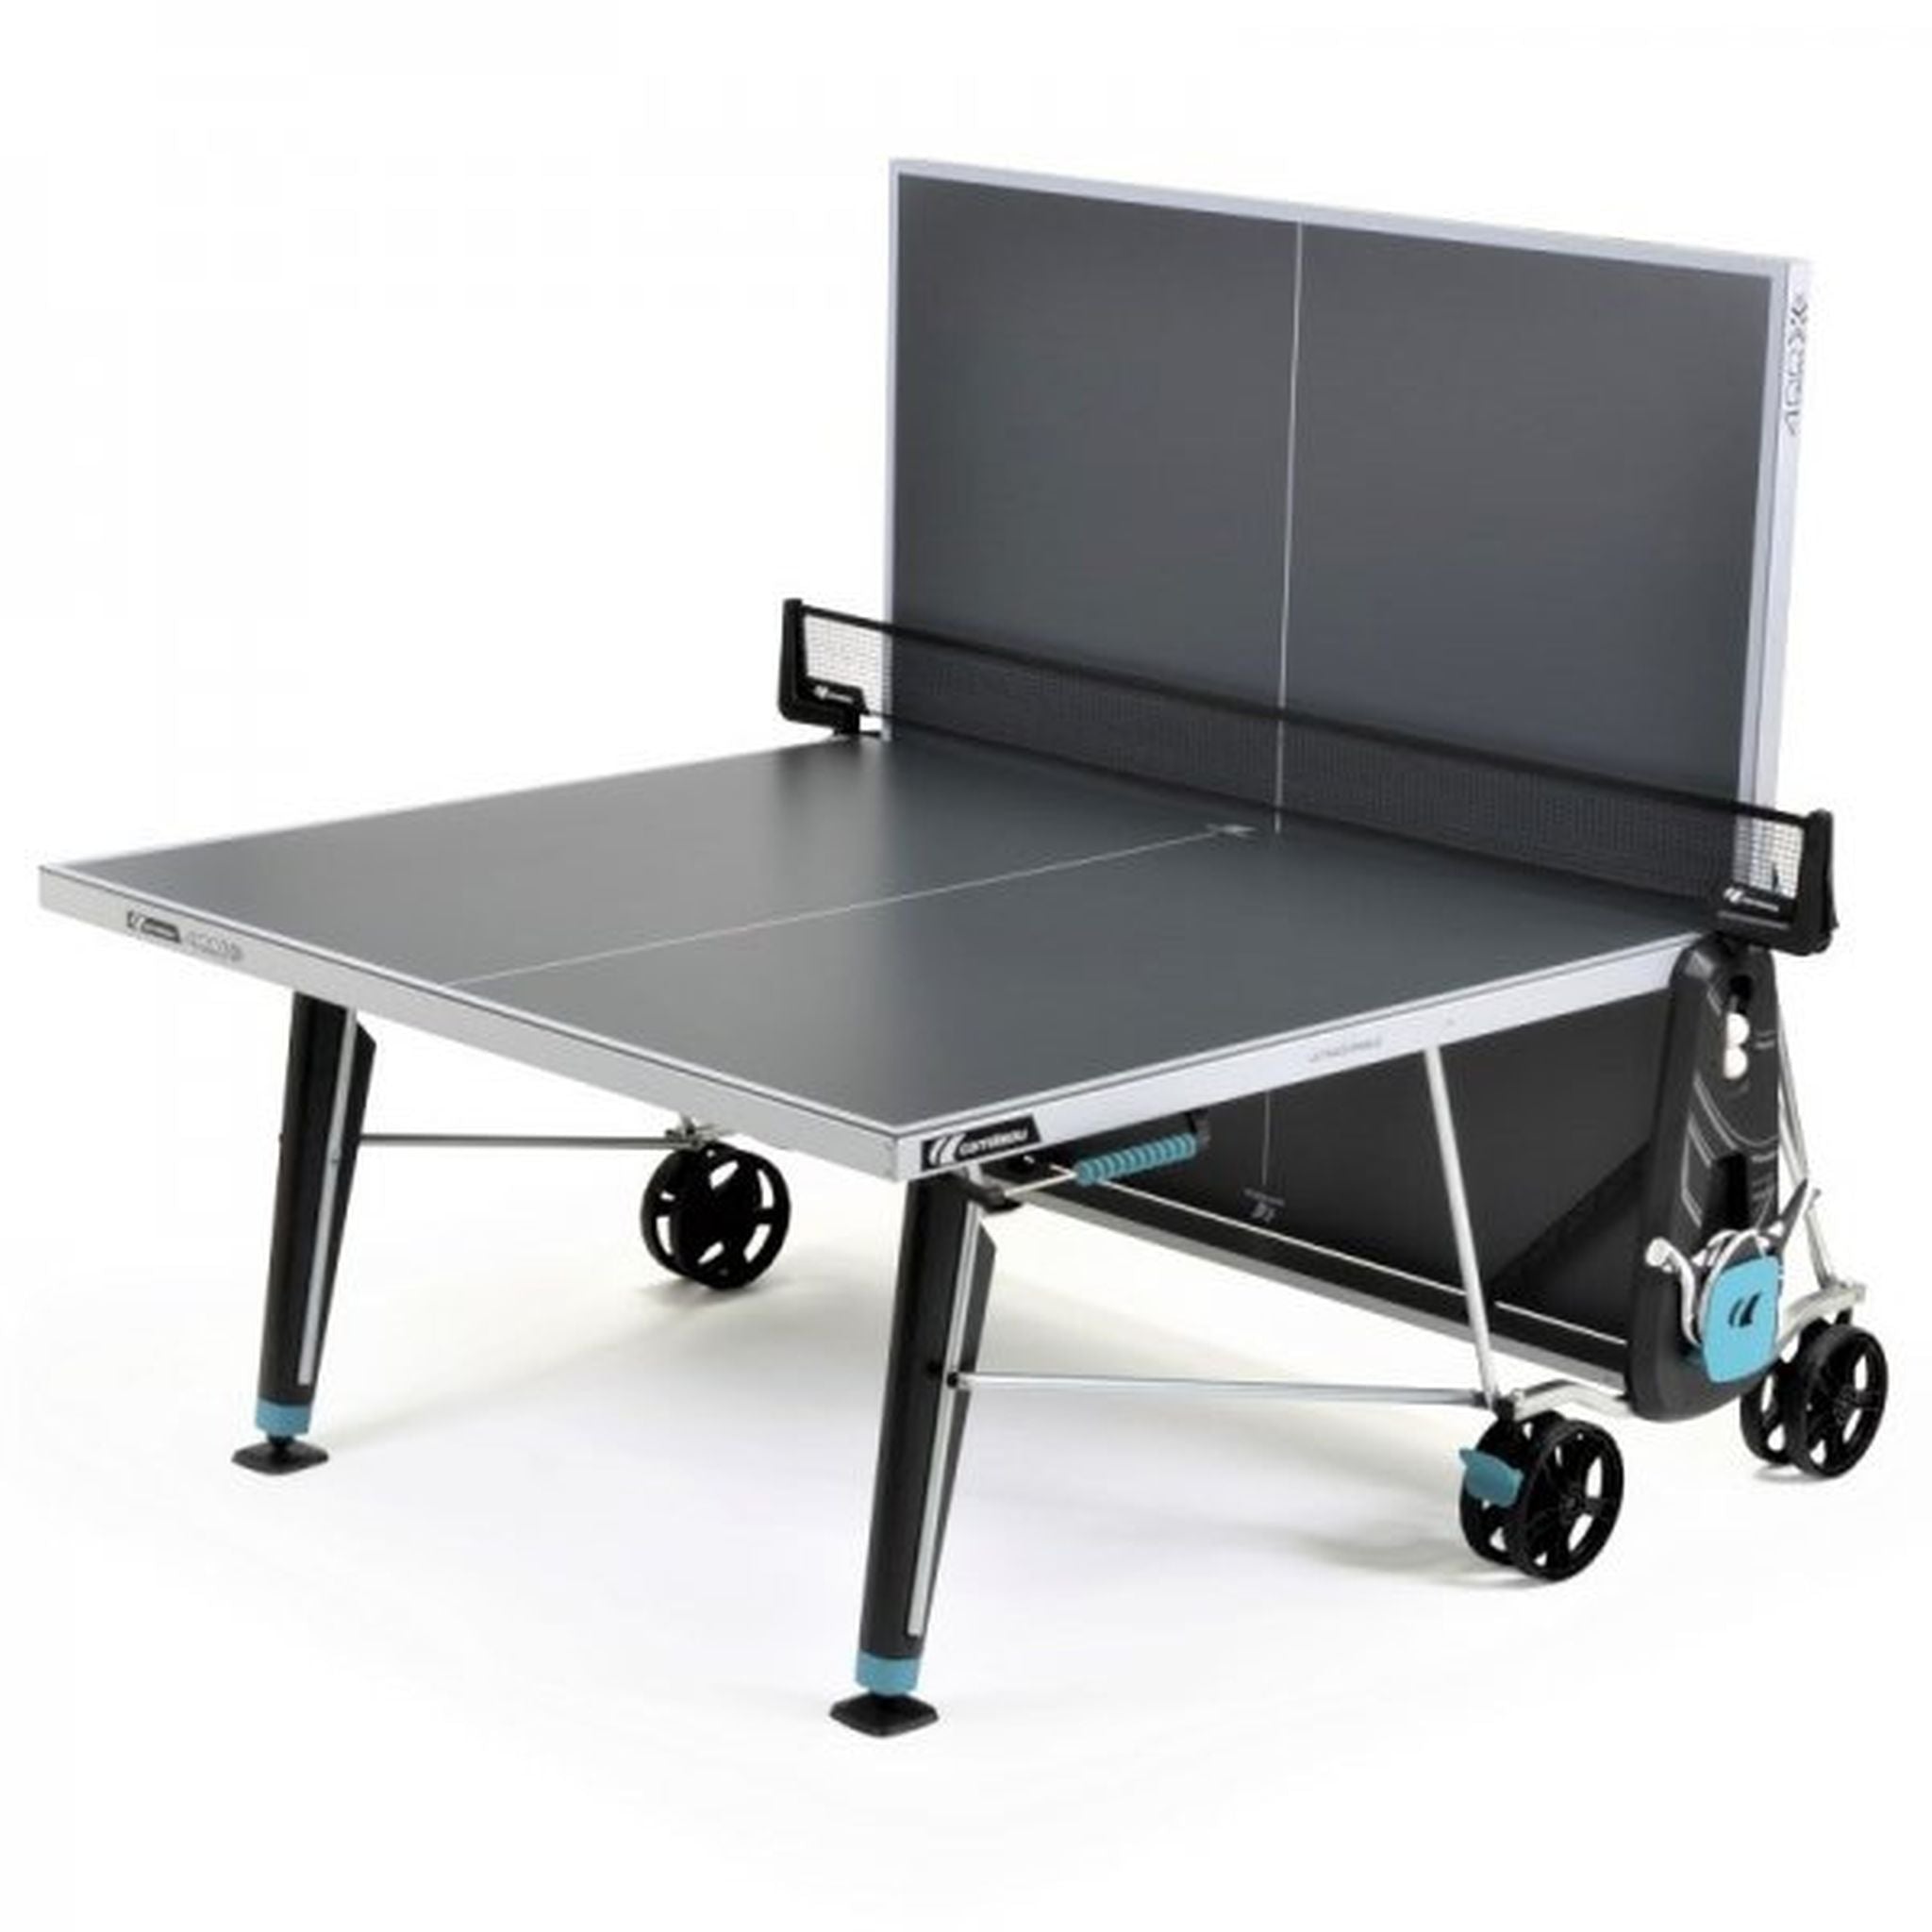 Cornilleau 400X Outdoor Table Tennis Table